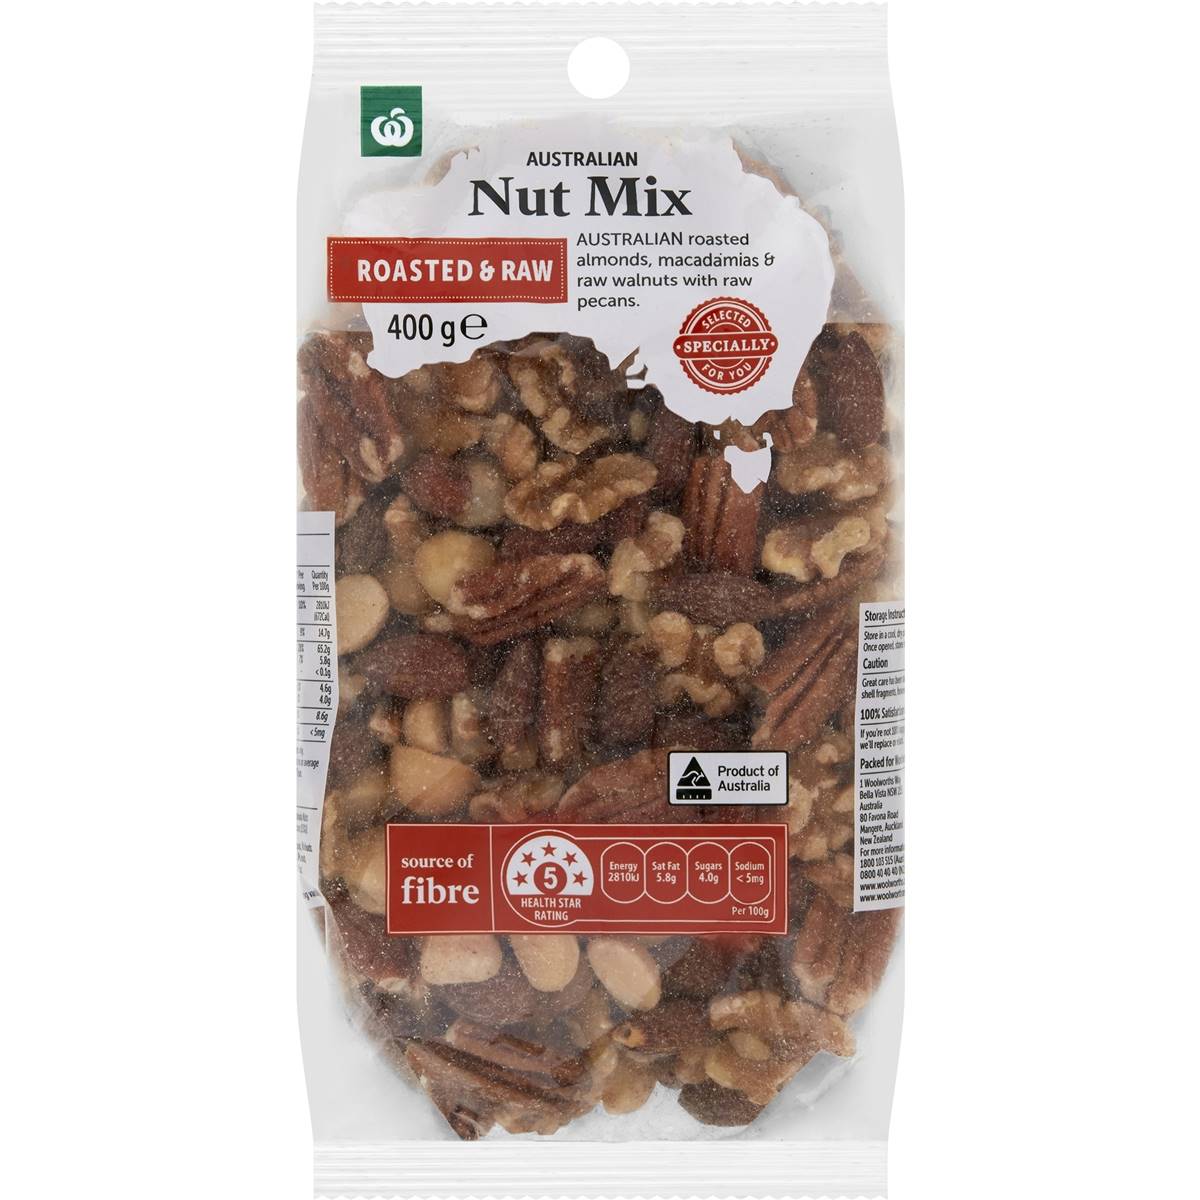 Calories in Woolworths Australian Nut Mix Roasted & Raw